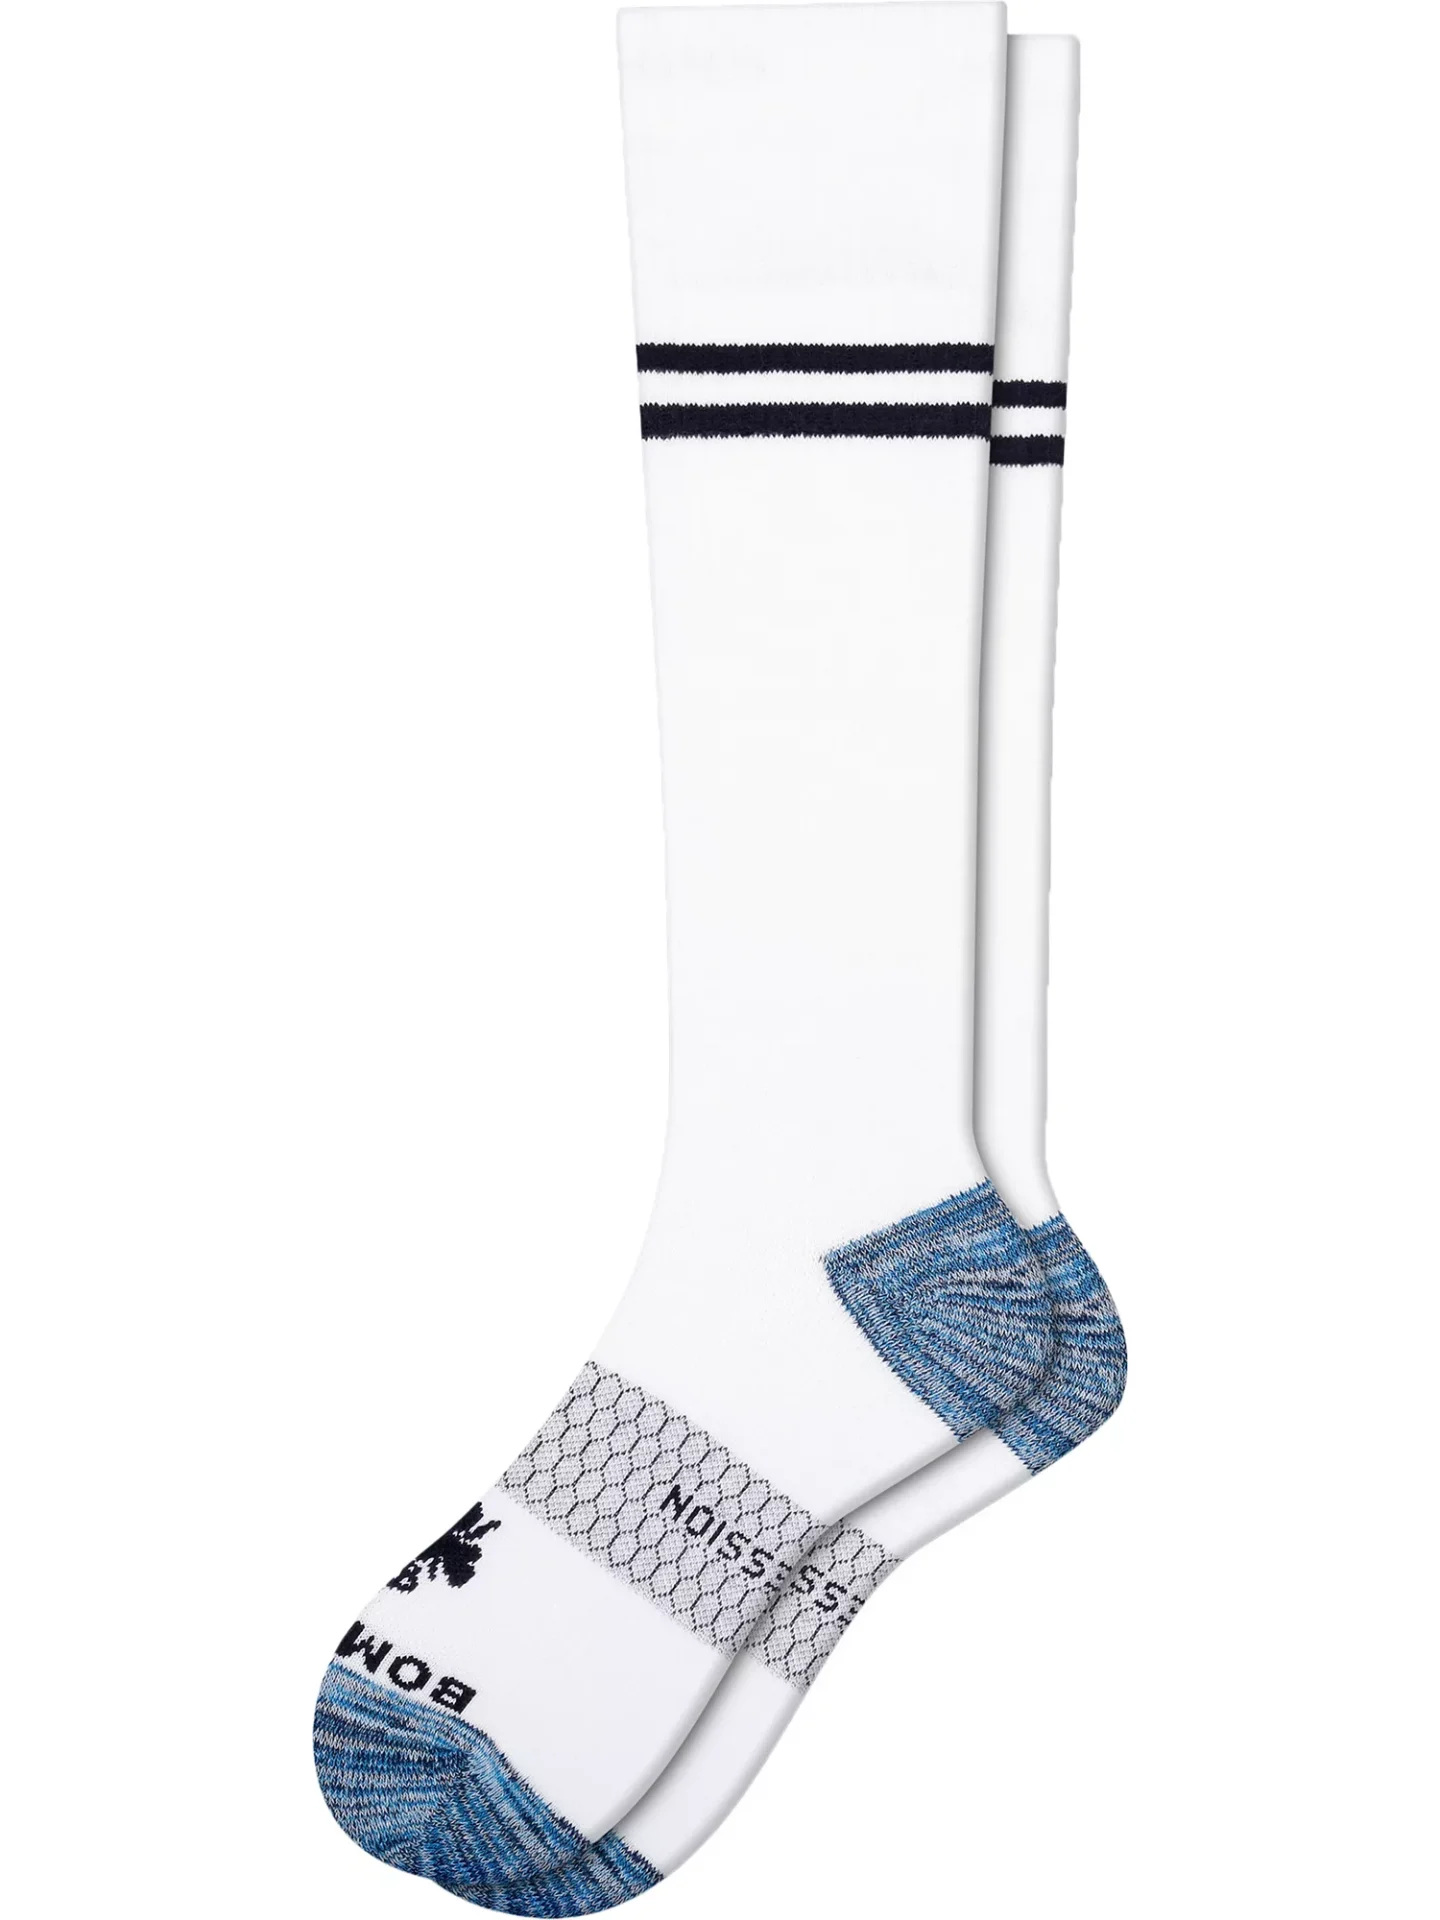 cotton compression socks from Bombas with black stripes on a white background